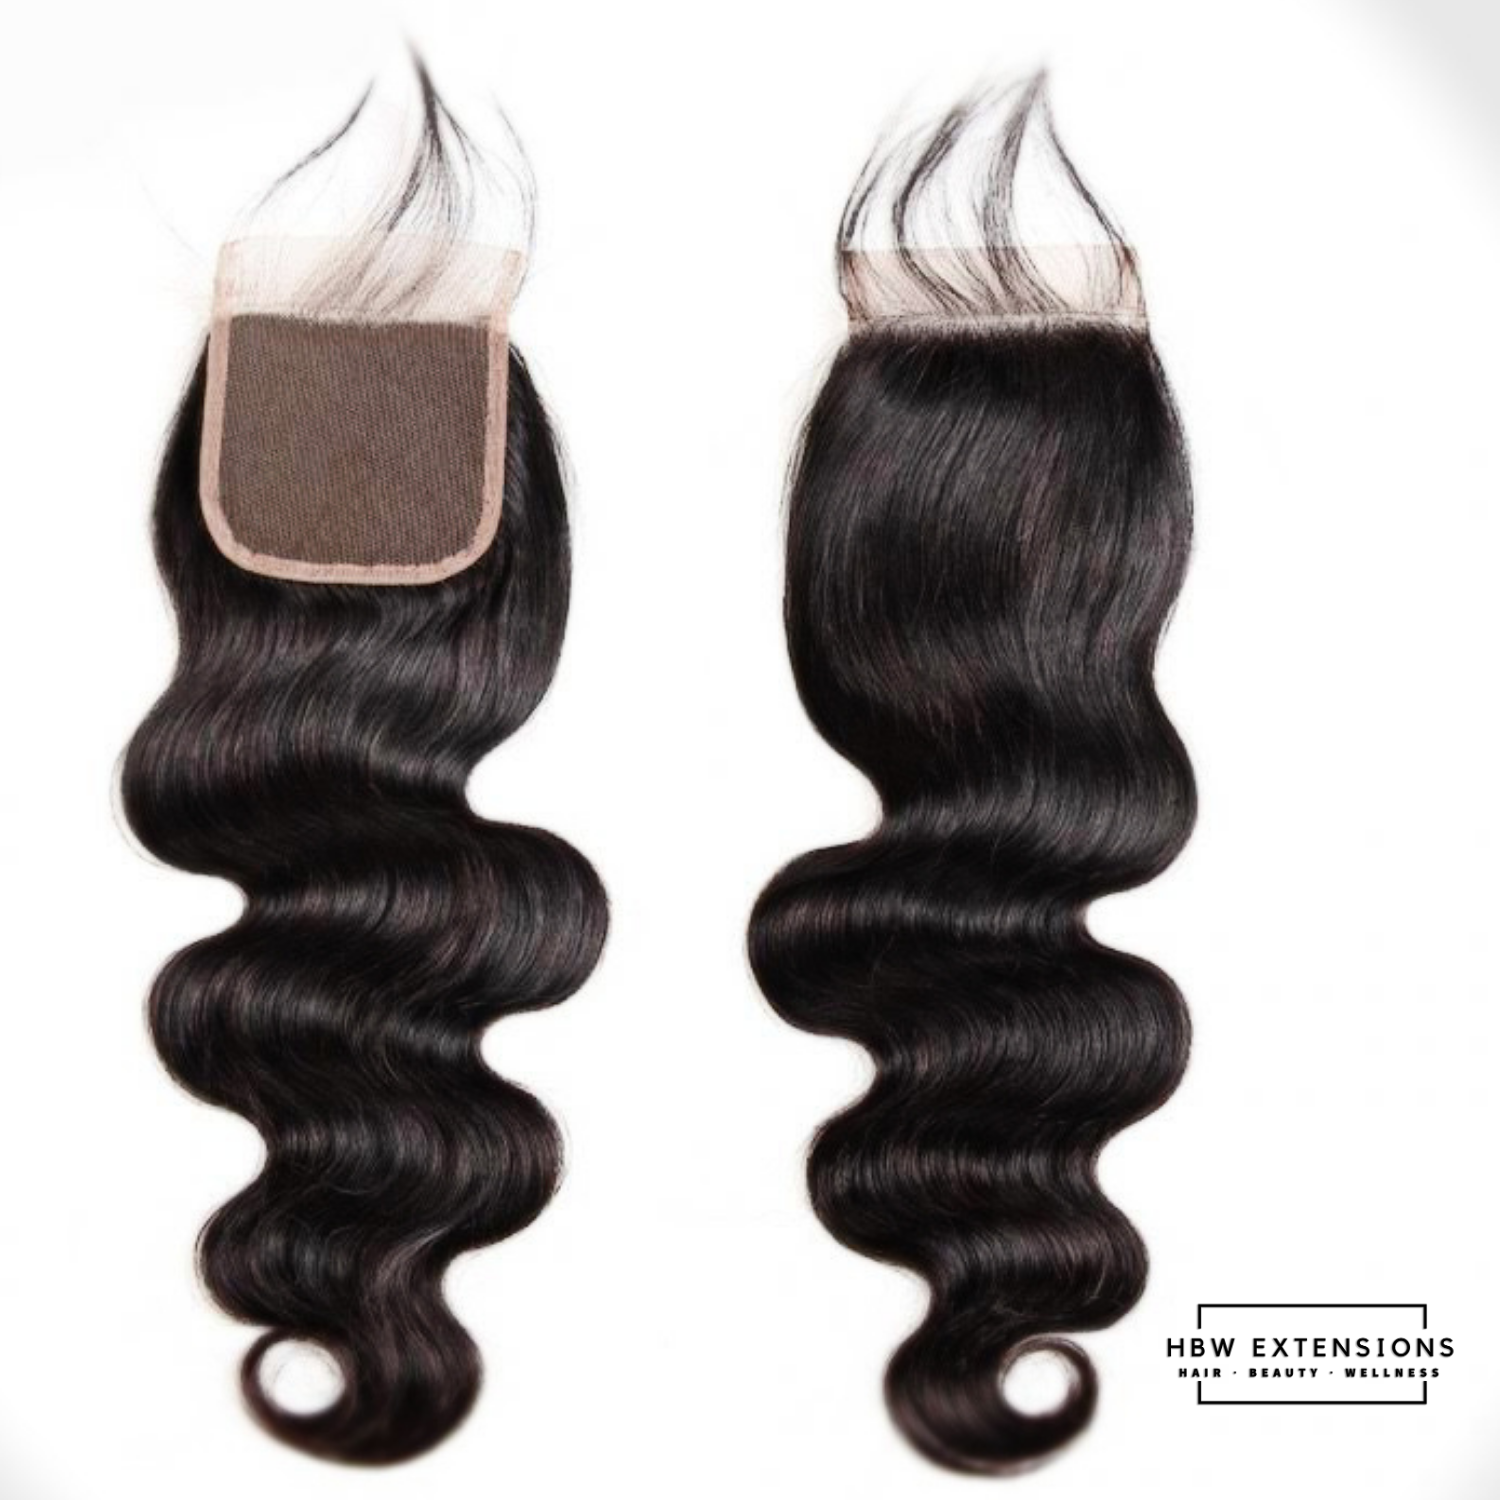 4 x 4 Straight / Loose Body Wave Swiss Lace Closure